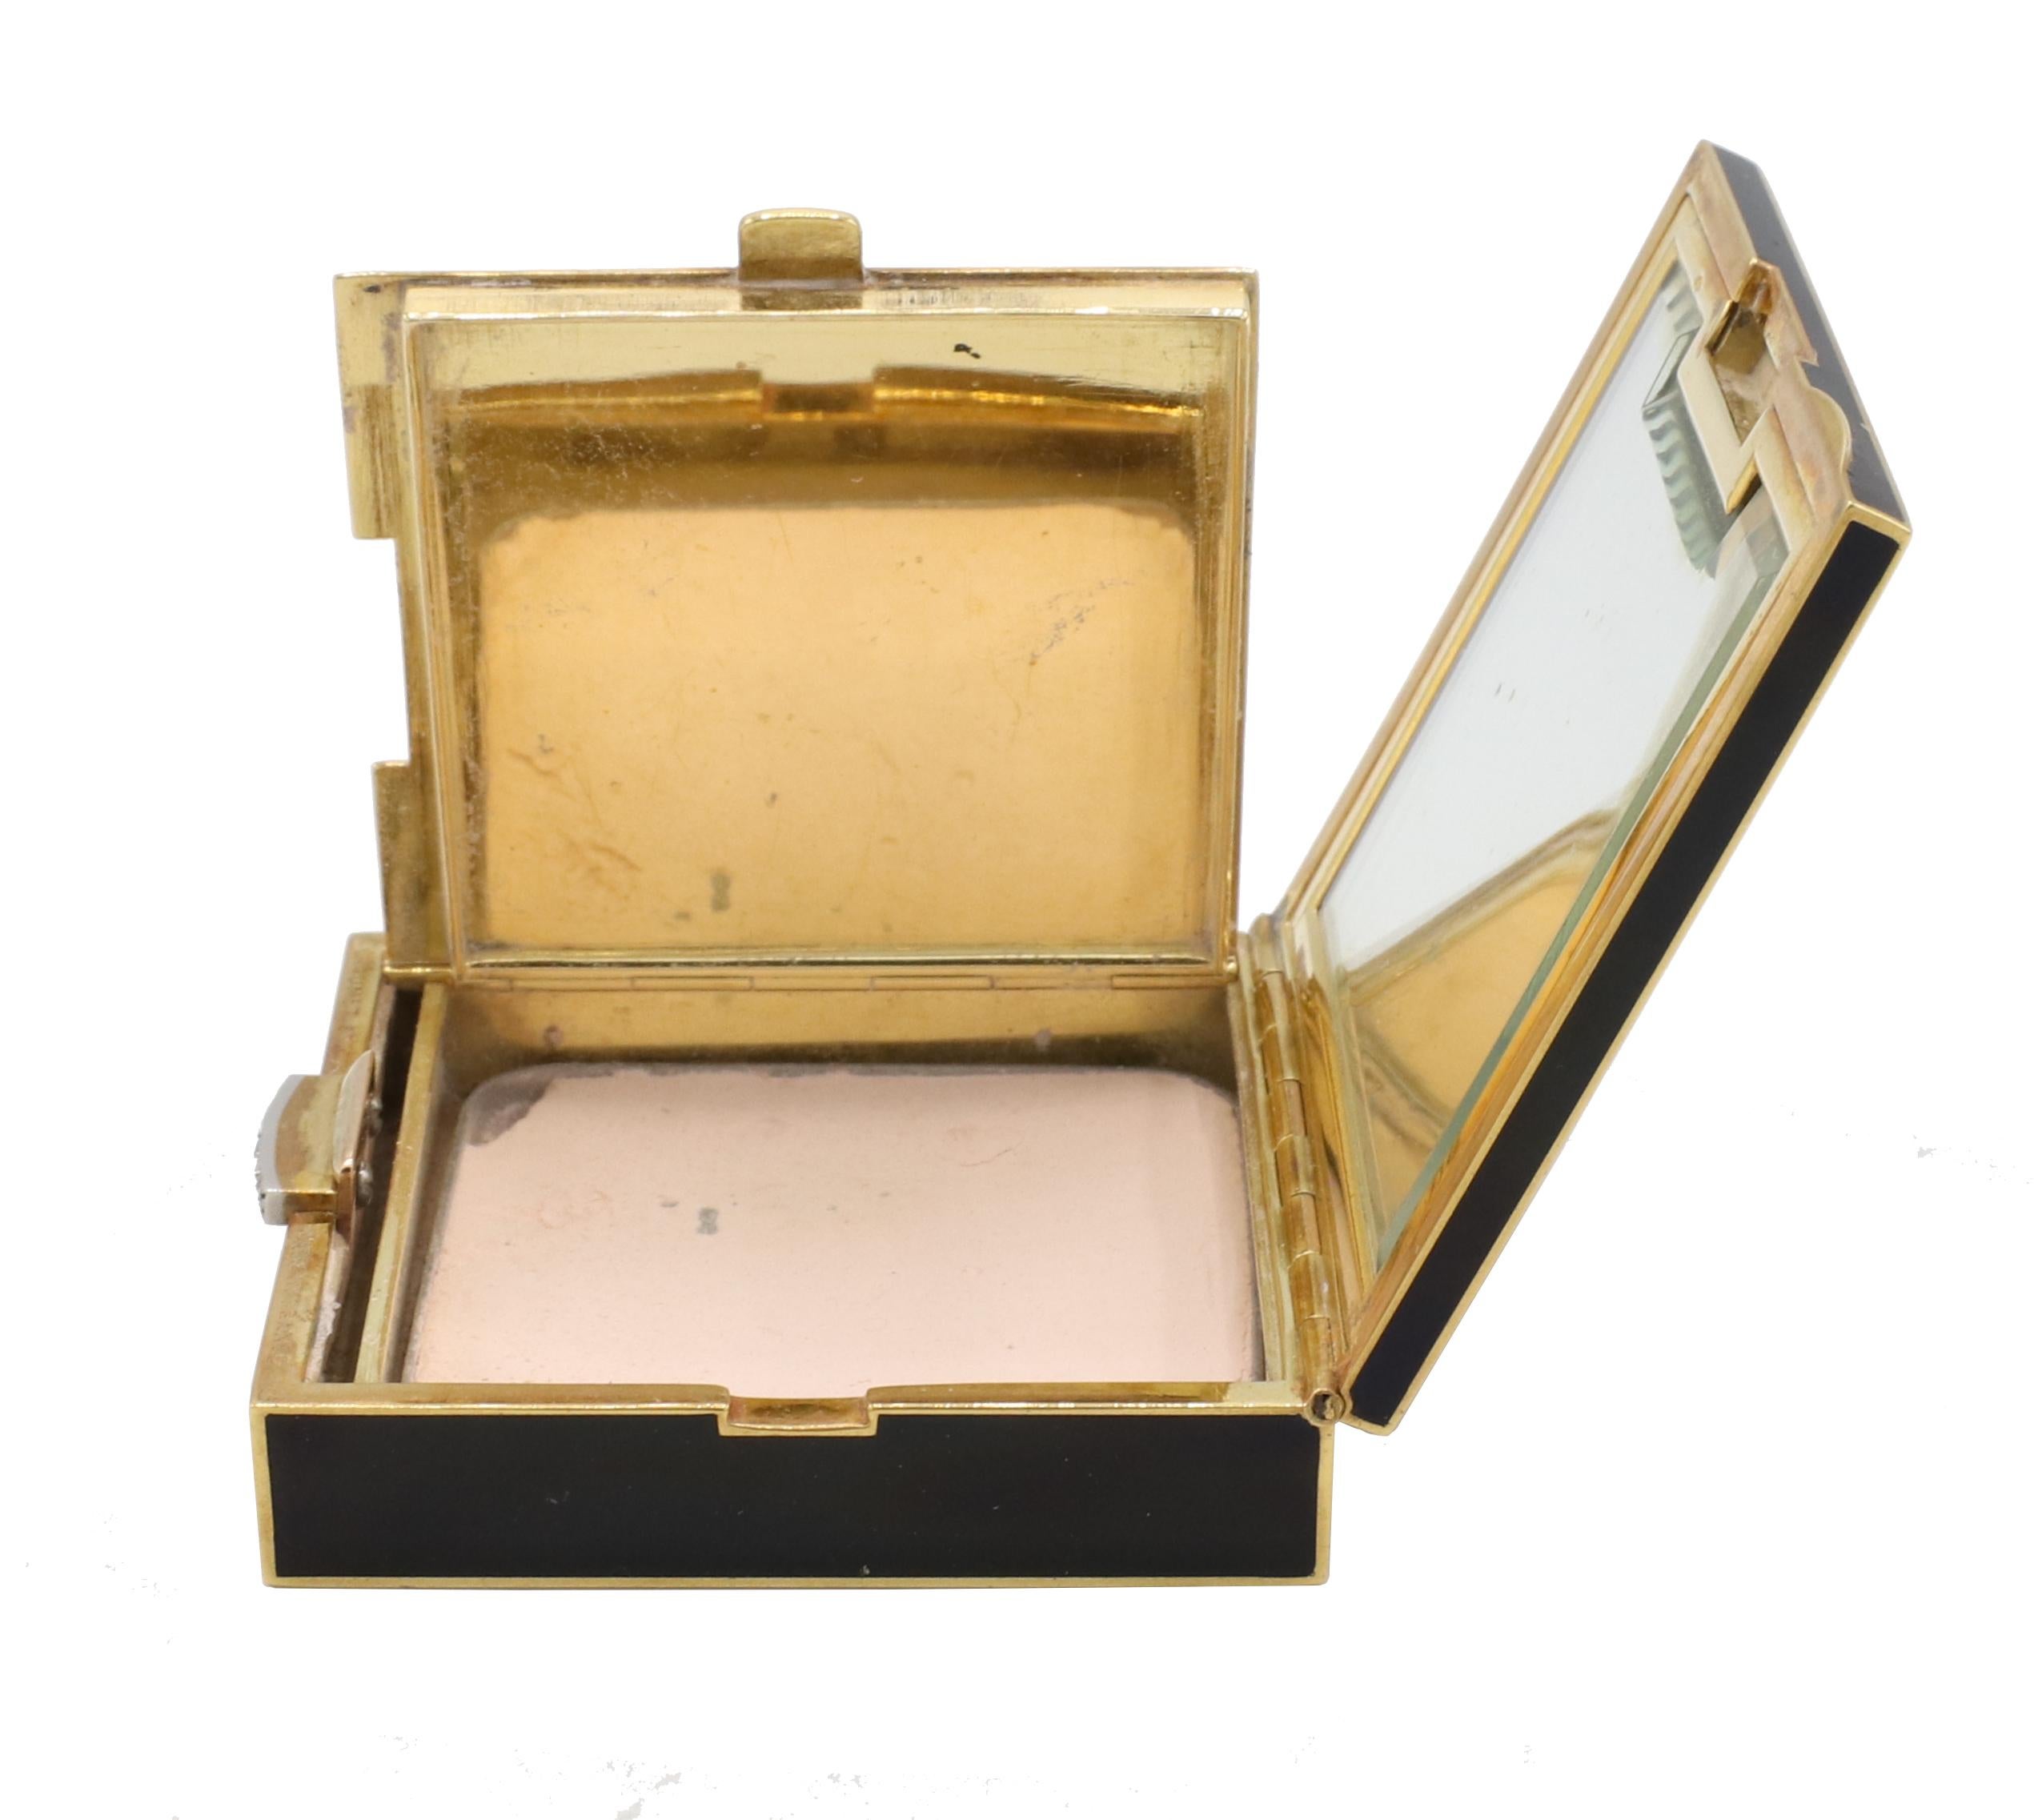 Art Deco Chaumet 18 Karat Yellow Gold & Enamel Mirrored Powder Compact With Case
Metal: 18k yellow gold 
Weight: 96.4 grams
Diamonds: .08 mine cut J SI diamonds
Dimensions: 45 x 45 x 12mm
Signed: CHAUMET MADE IN FRANCE (french hallmarks) 
Enamel: